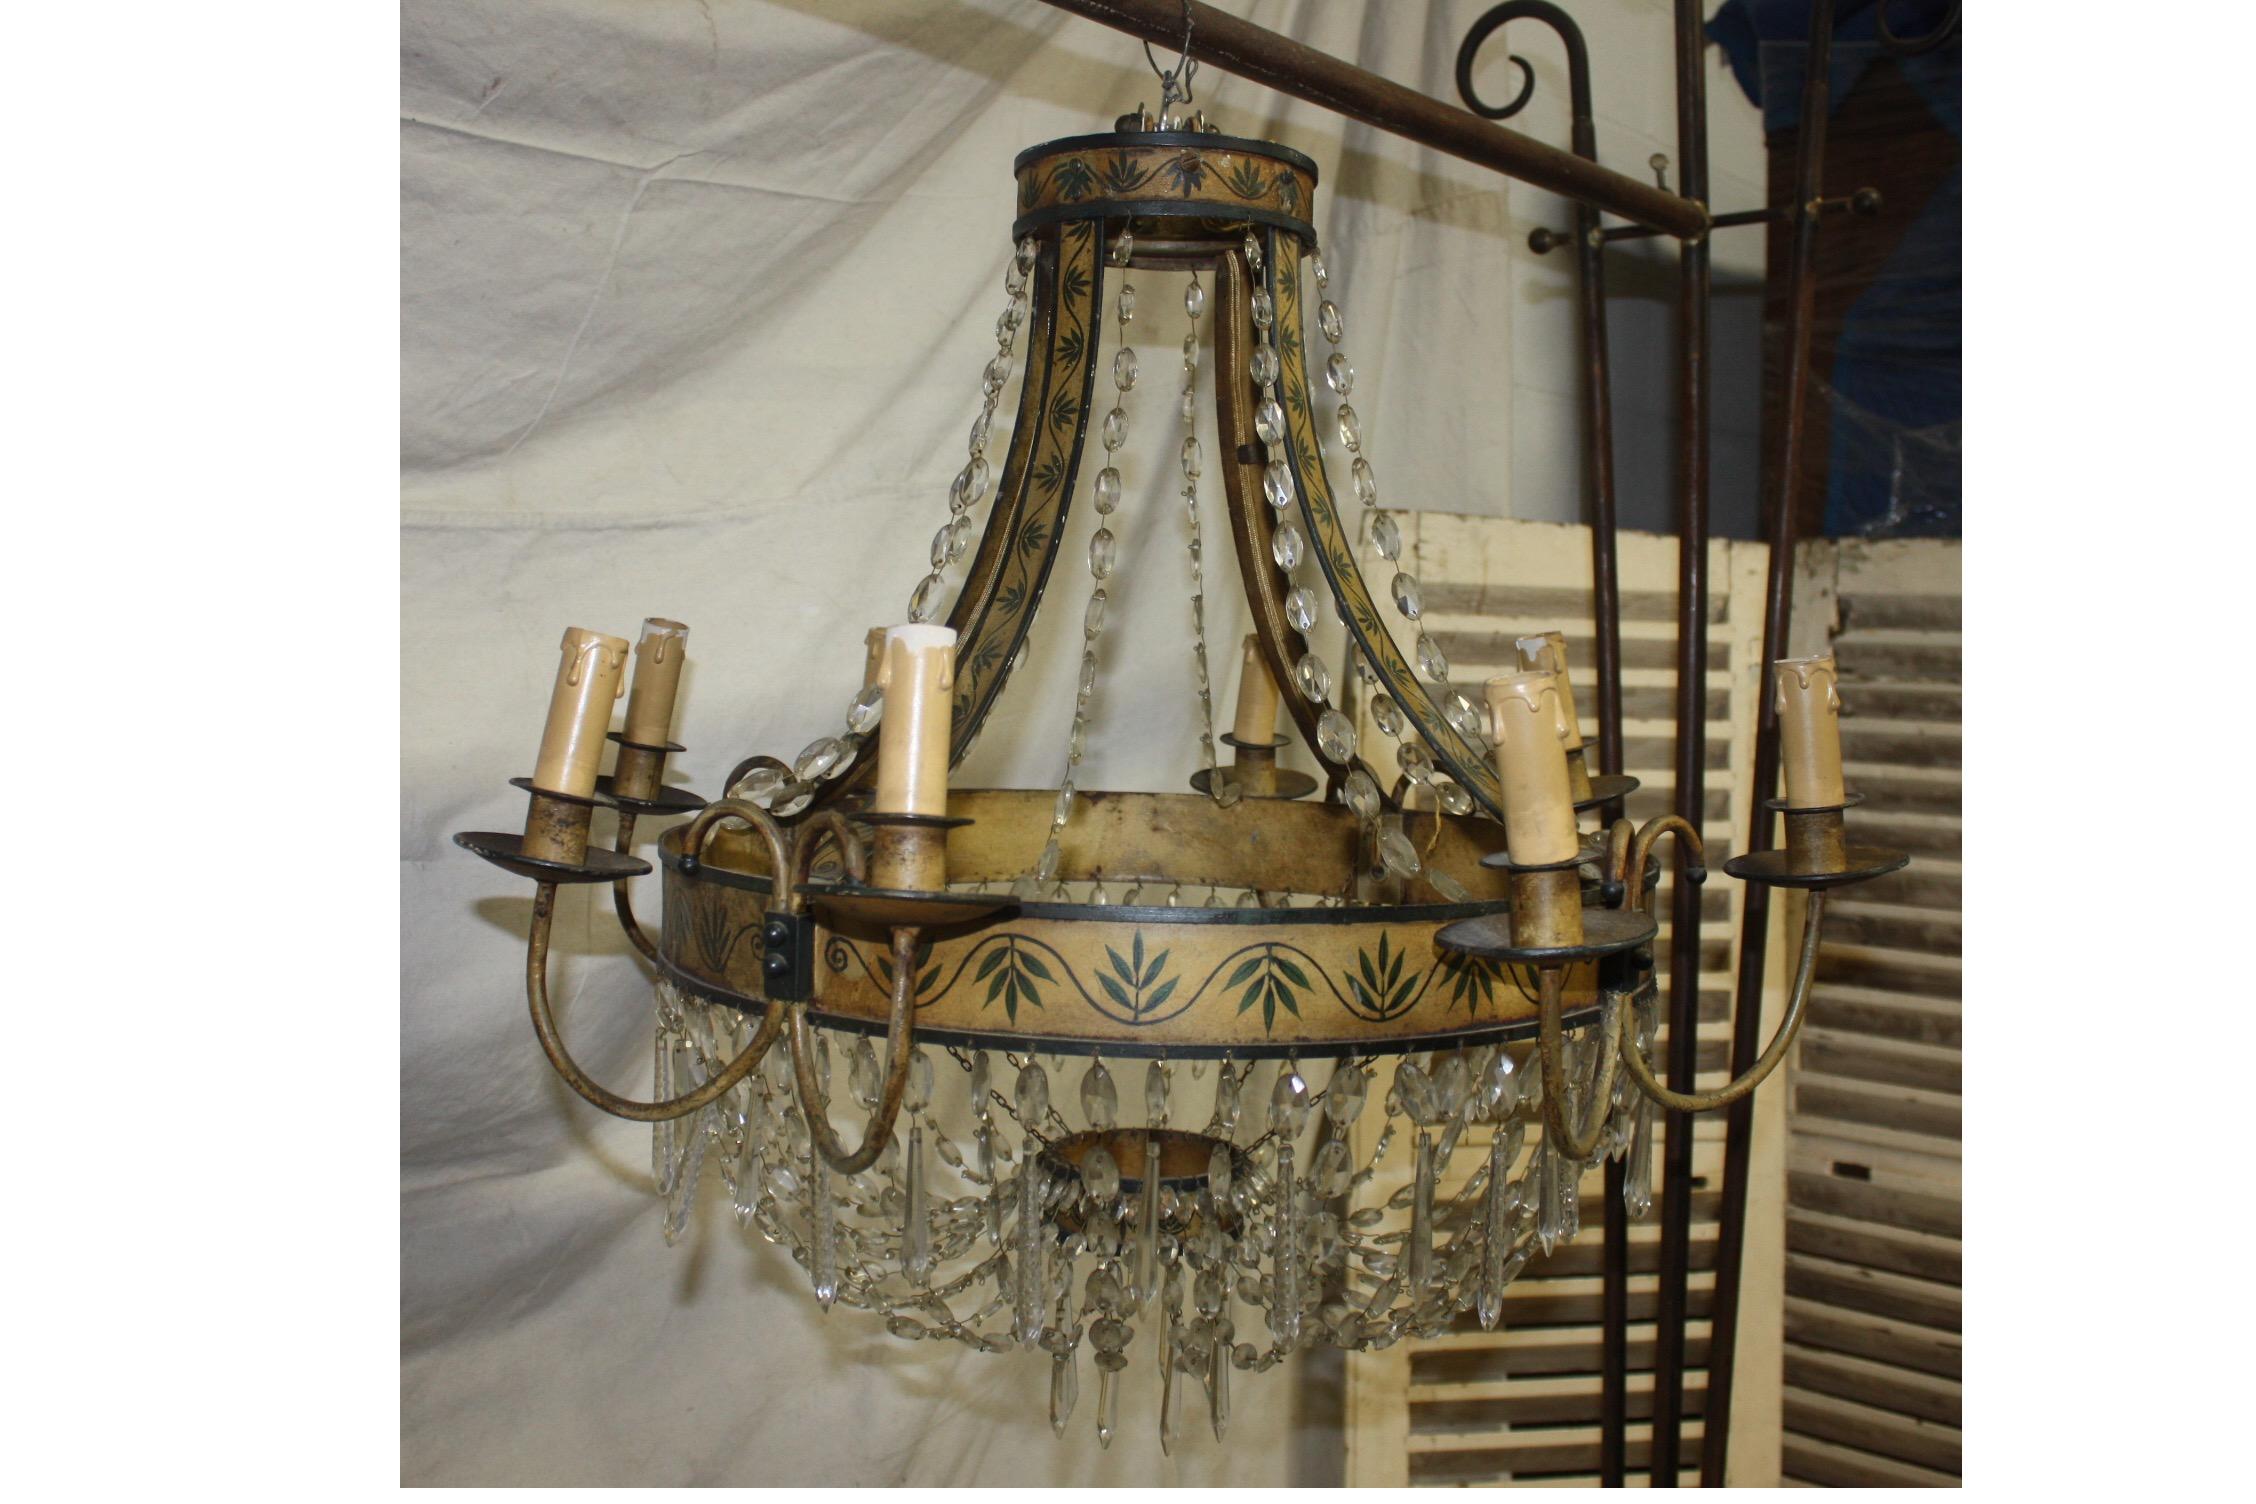 Hand-Painted Sublime 19th Century French Empire Chandelier For Sale